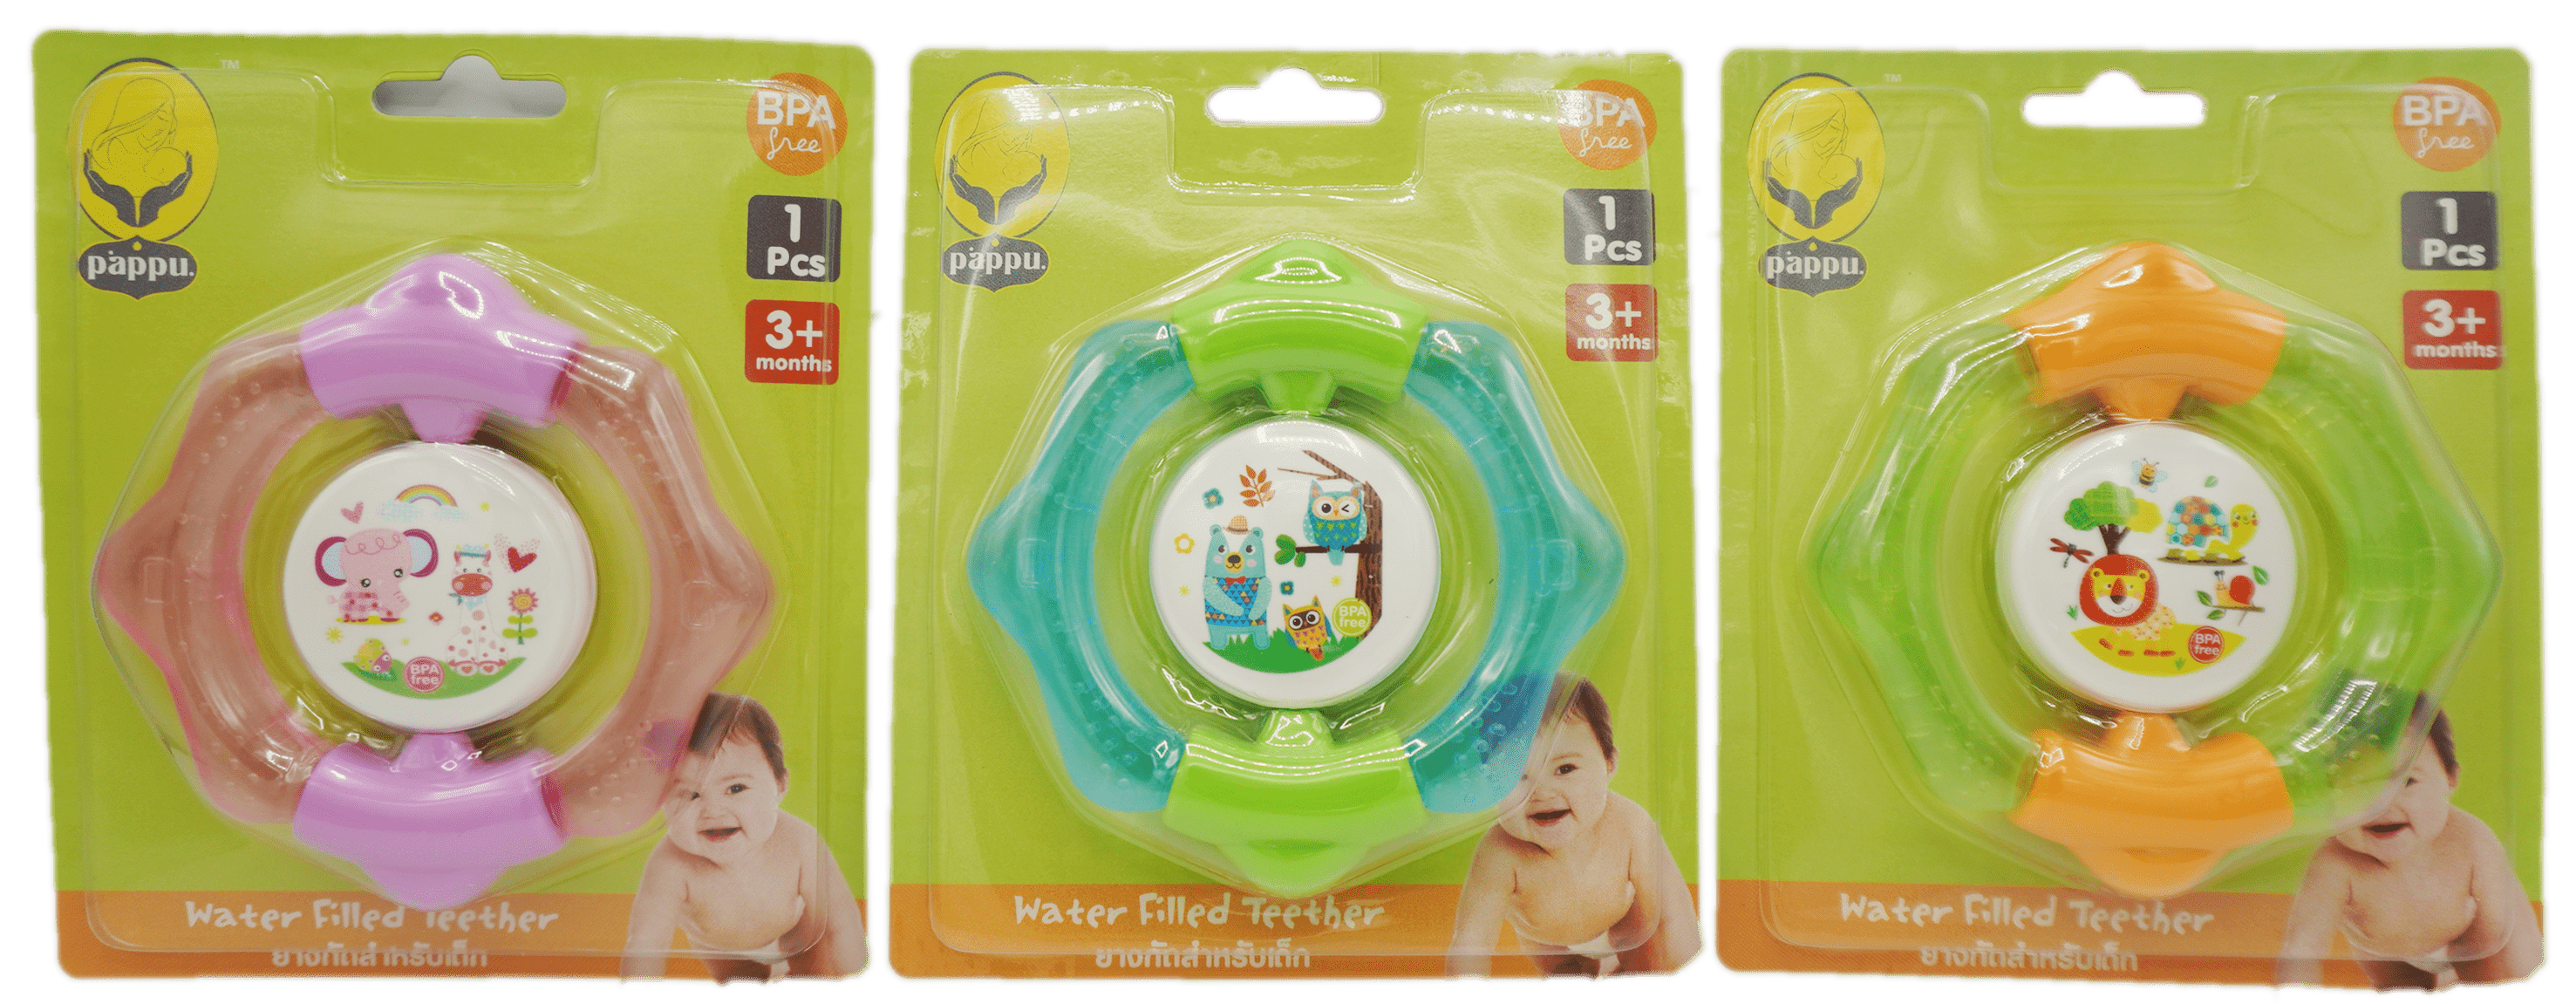 Spin water filled teether